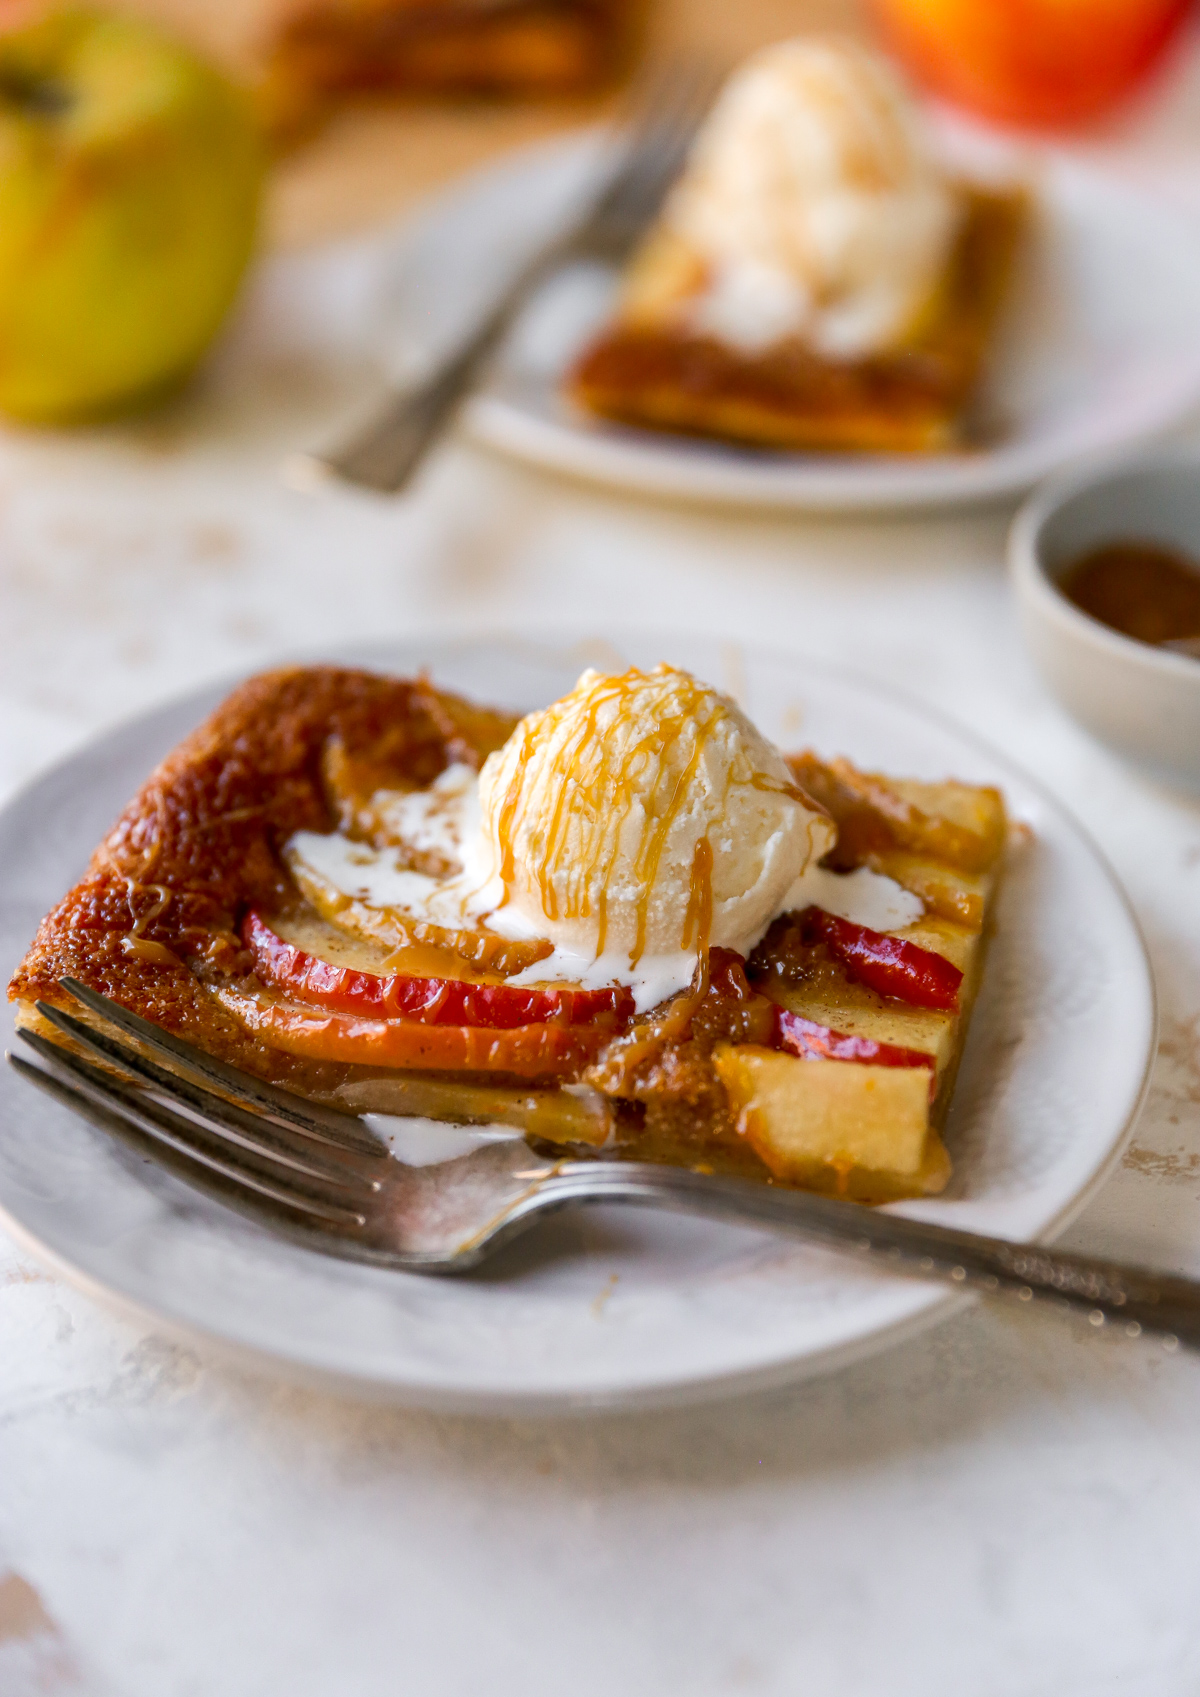 Brown Butter Apple Tart - Yes to Yolks